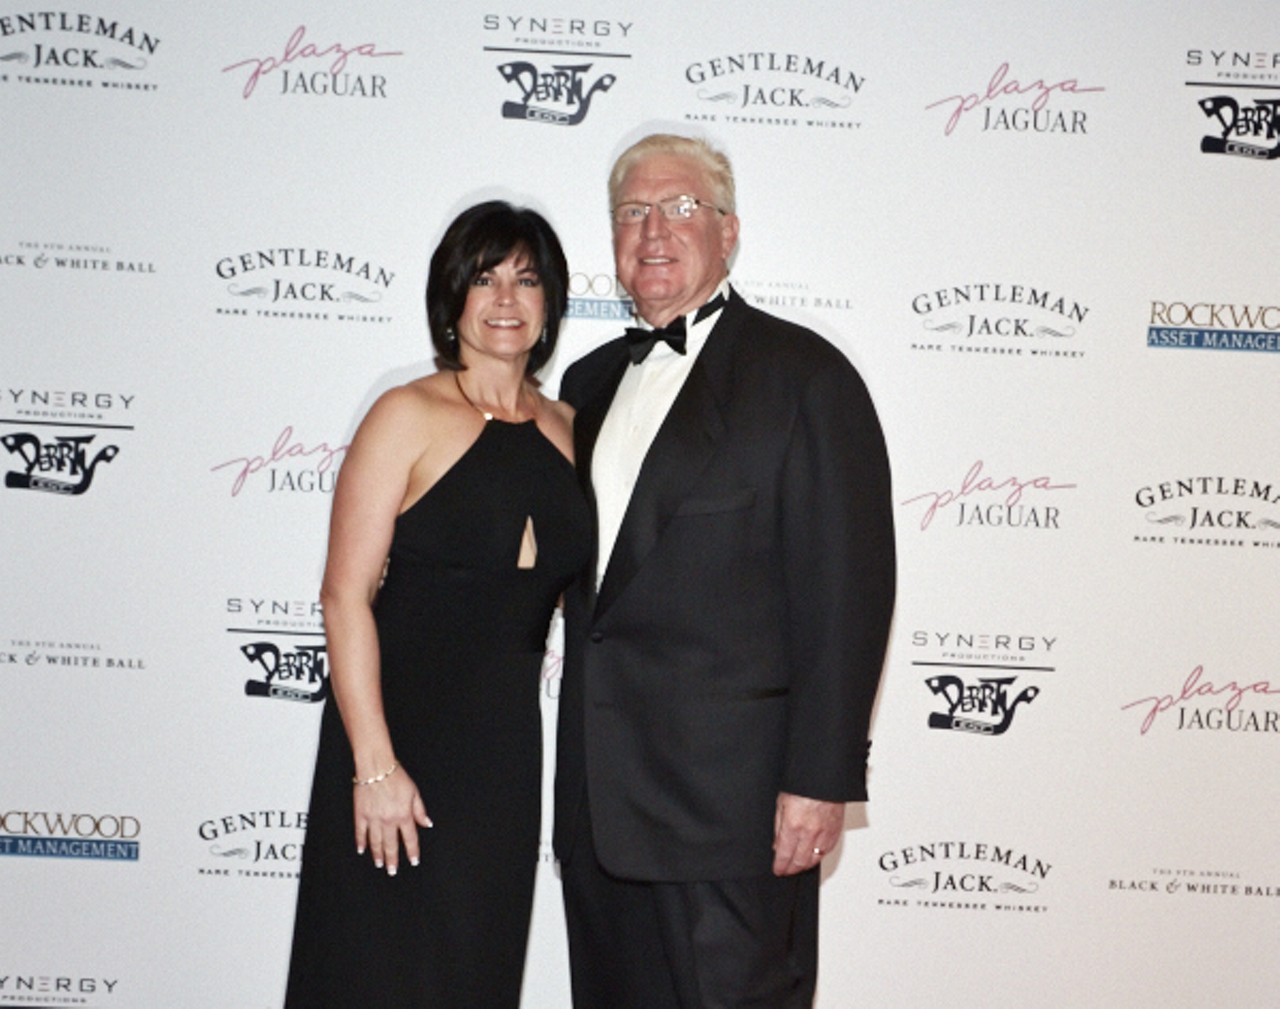 Nelly's Black and White Ball at the Four Seasons